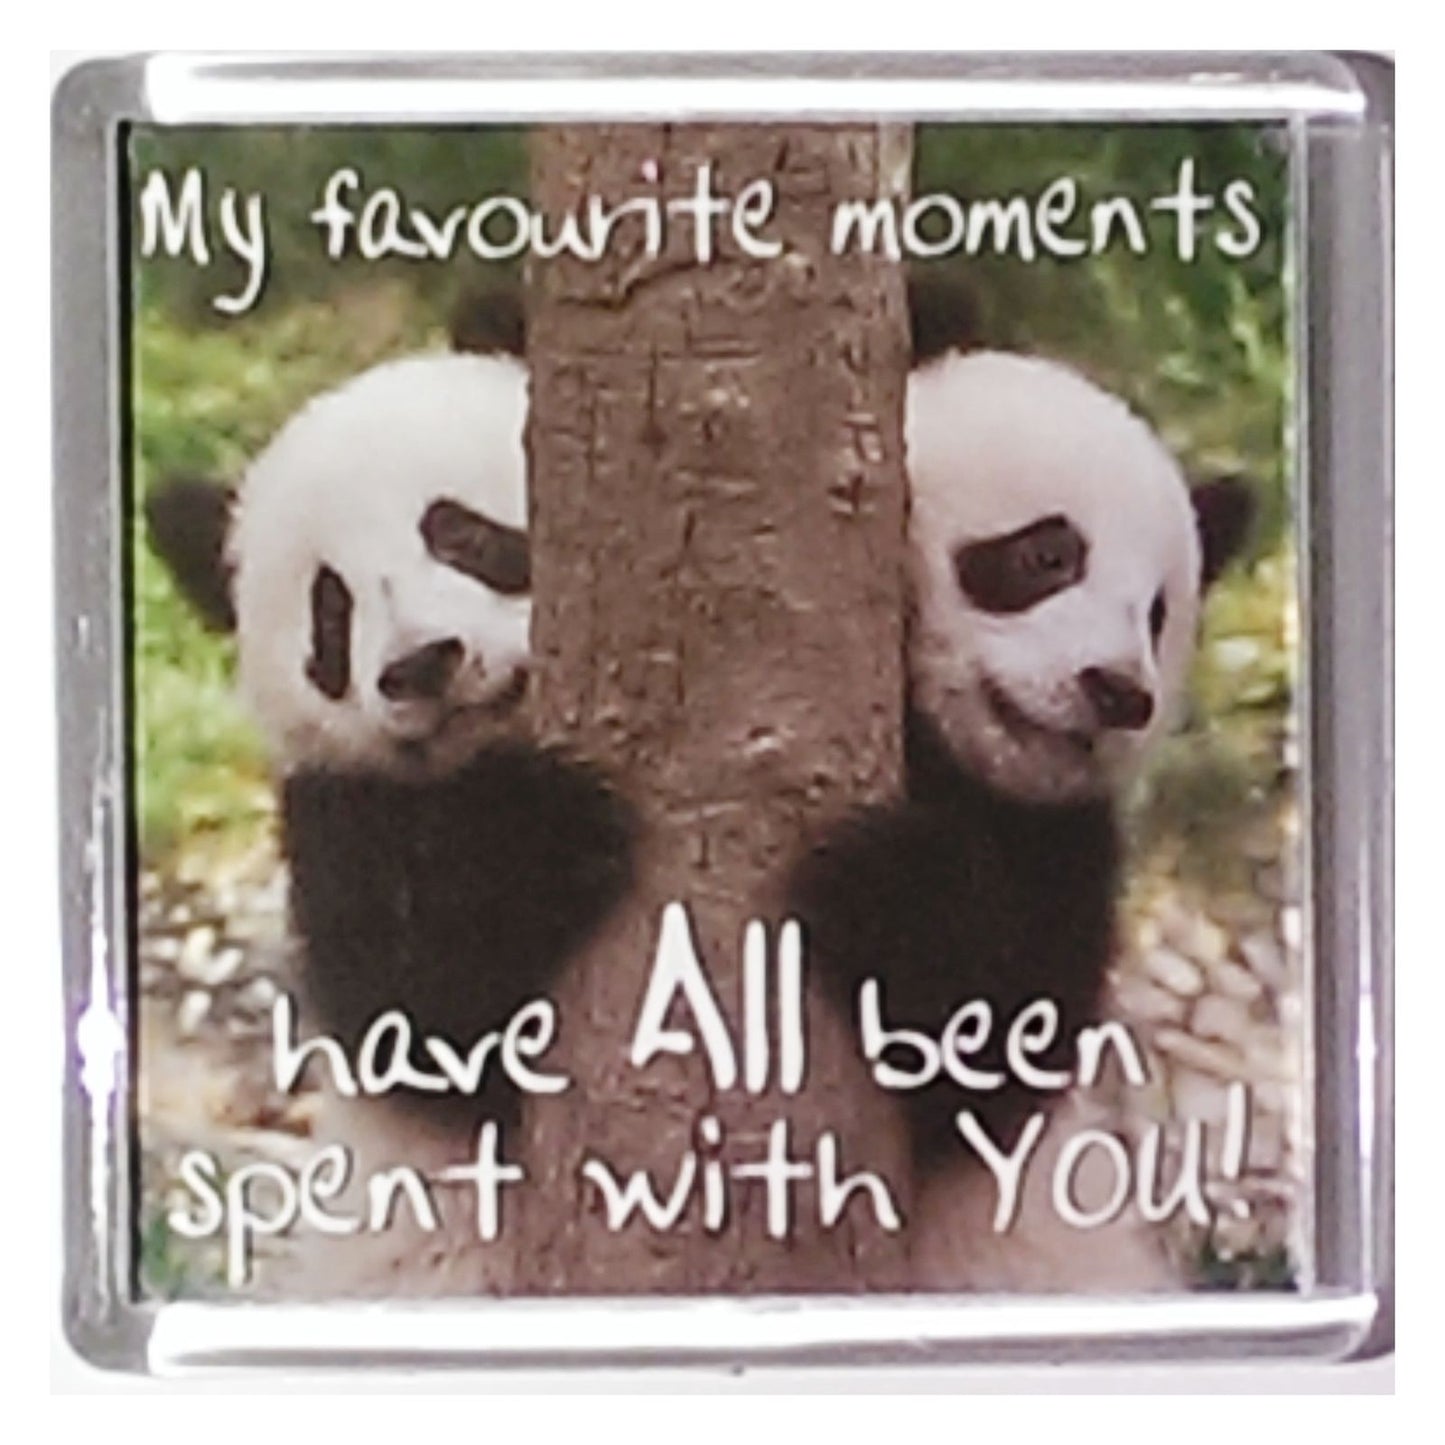 History & Heraldry Sentiment Fridge Magnet My favourite moments have